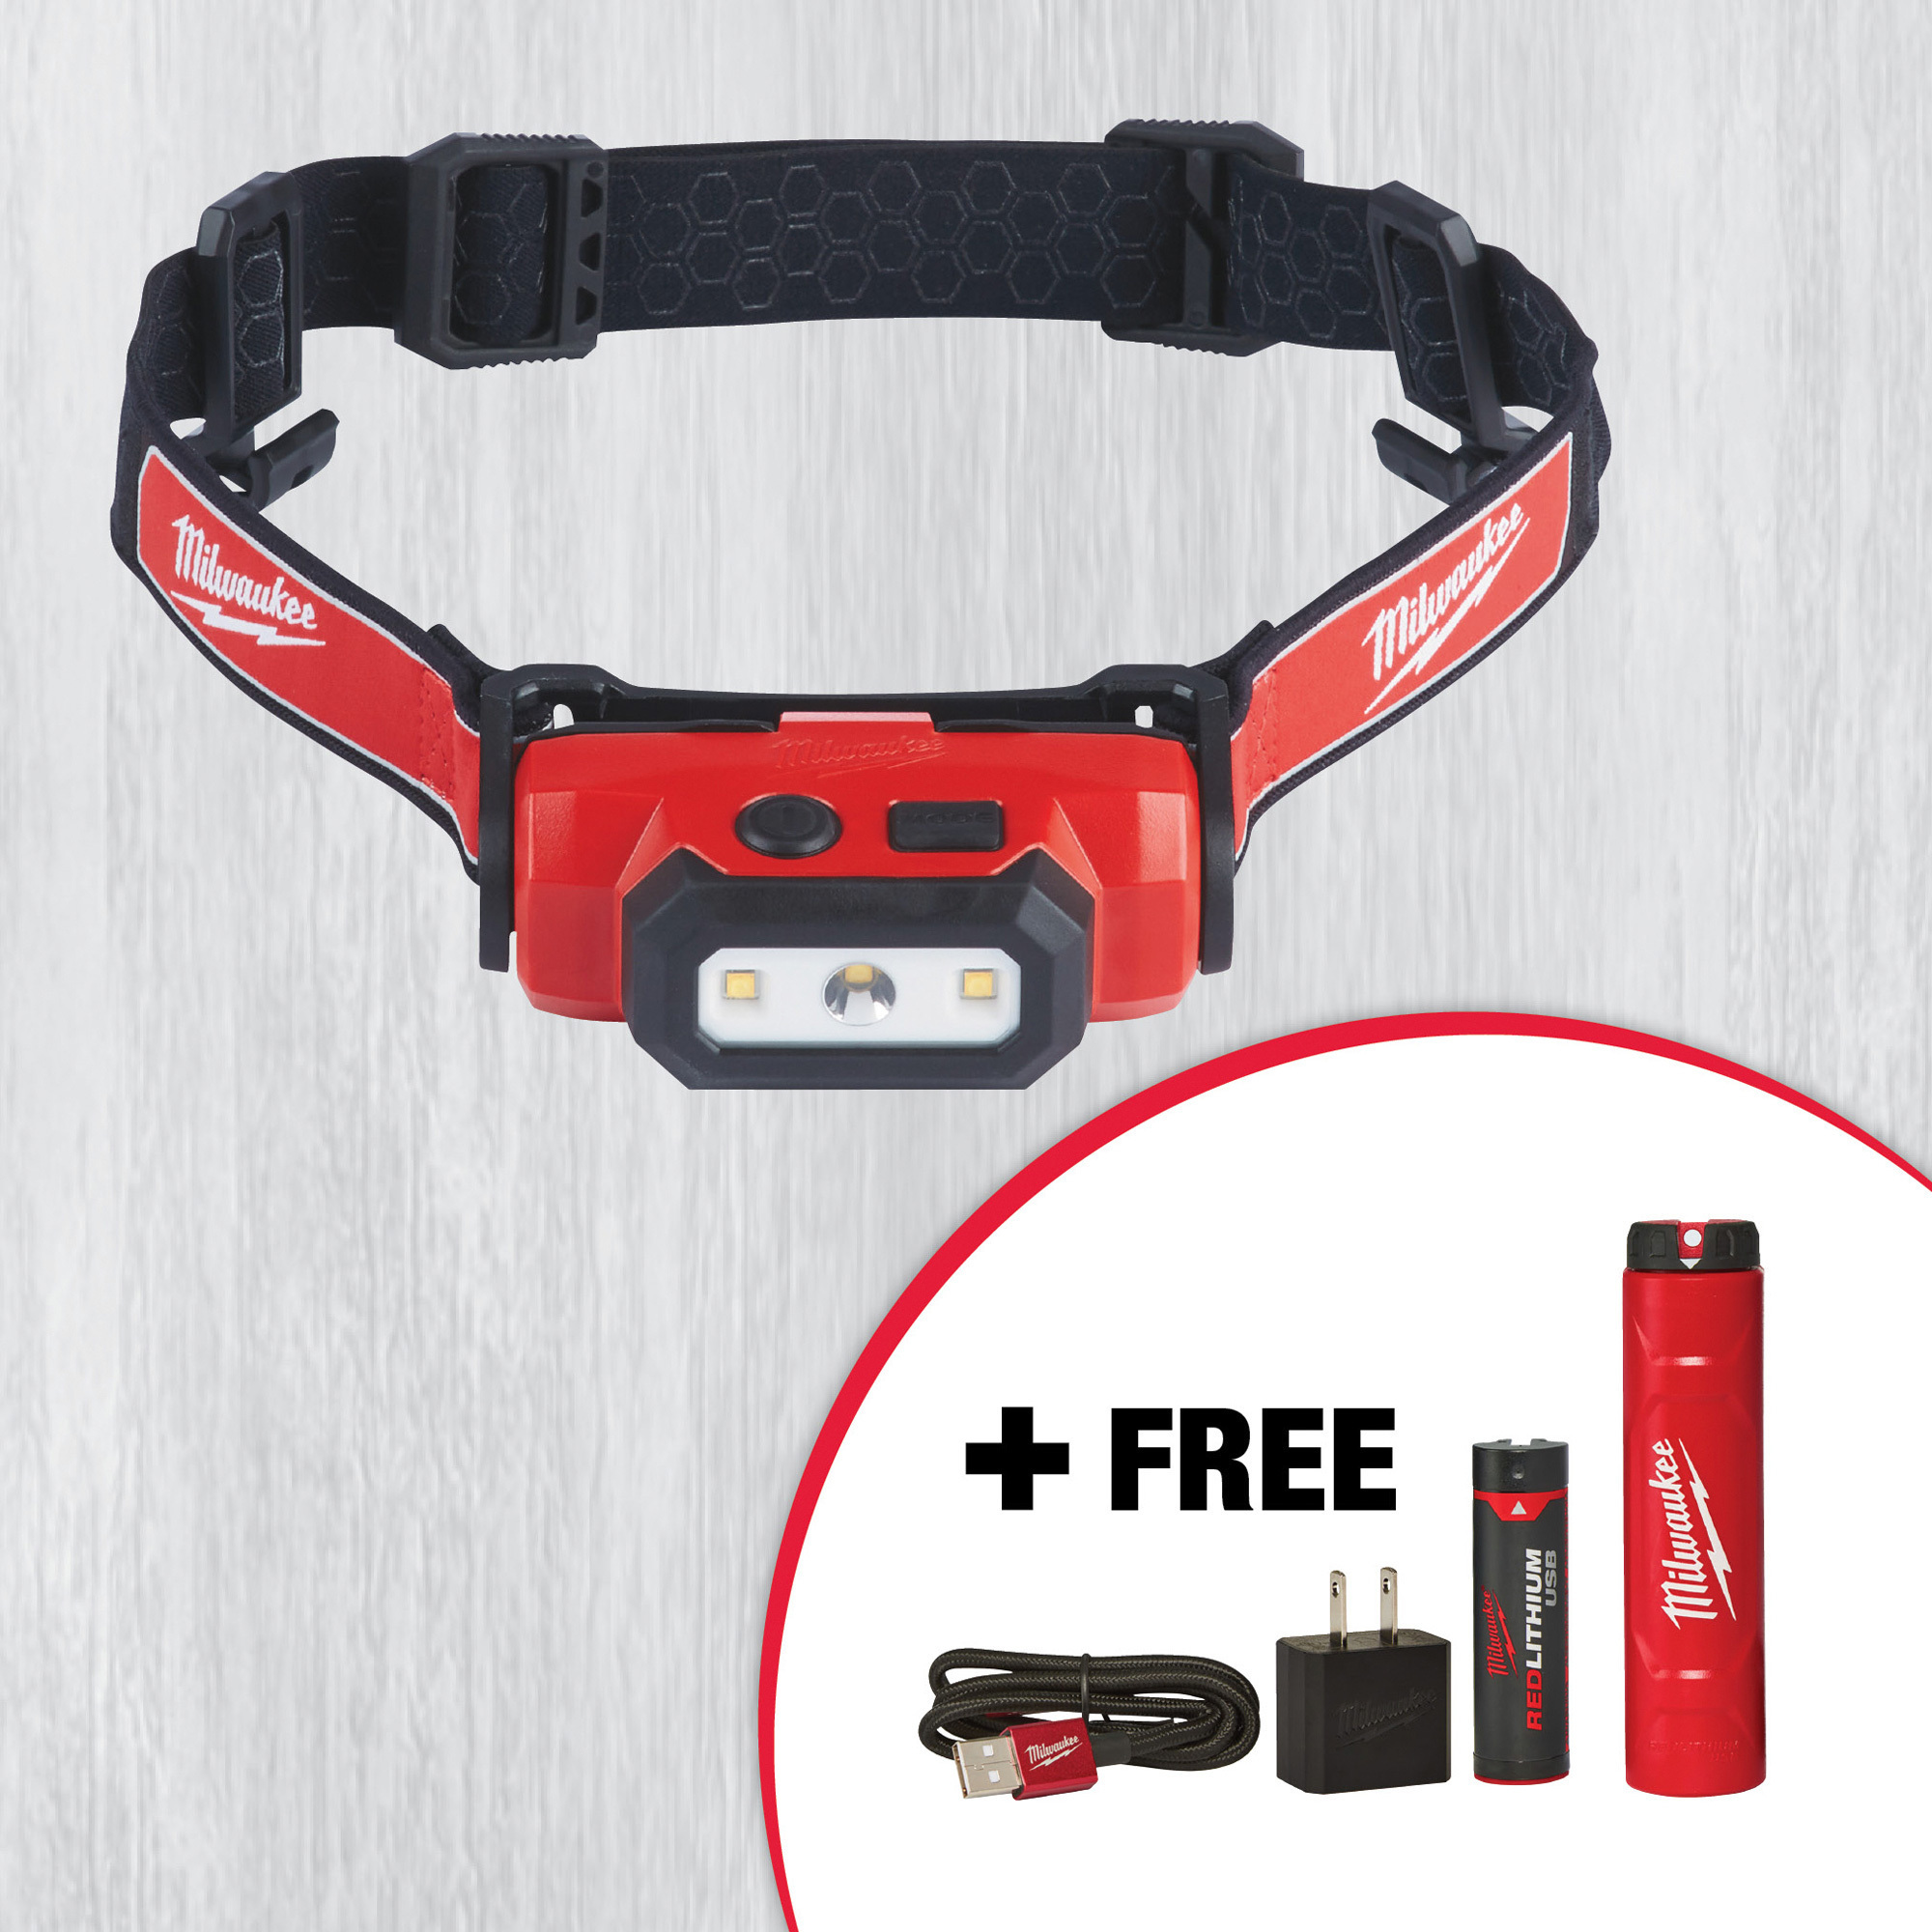 SPECIAL BUY! Milwaukee USB Rechargeable Hard Hat Headlamp Kit (2111-21)  with FREE RedLithium USB Battery and Charger Kit (48-59-2003)! Northern  Tool